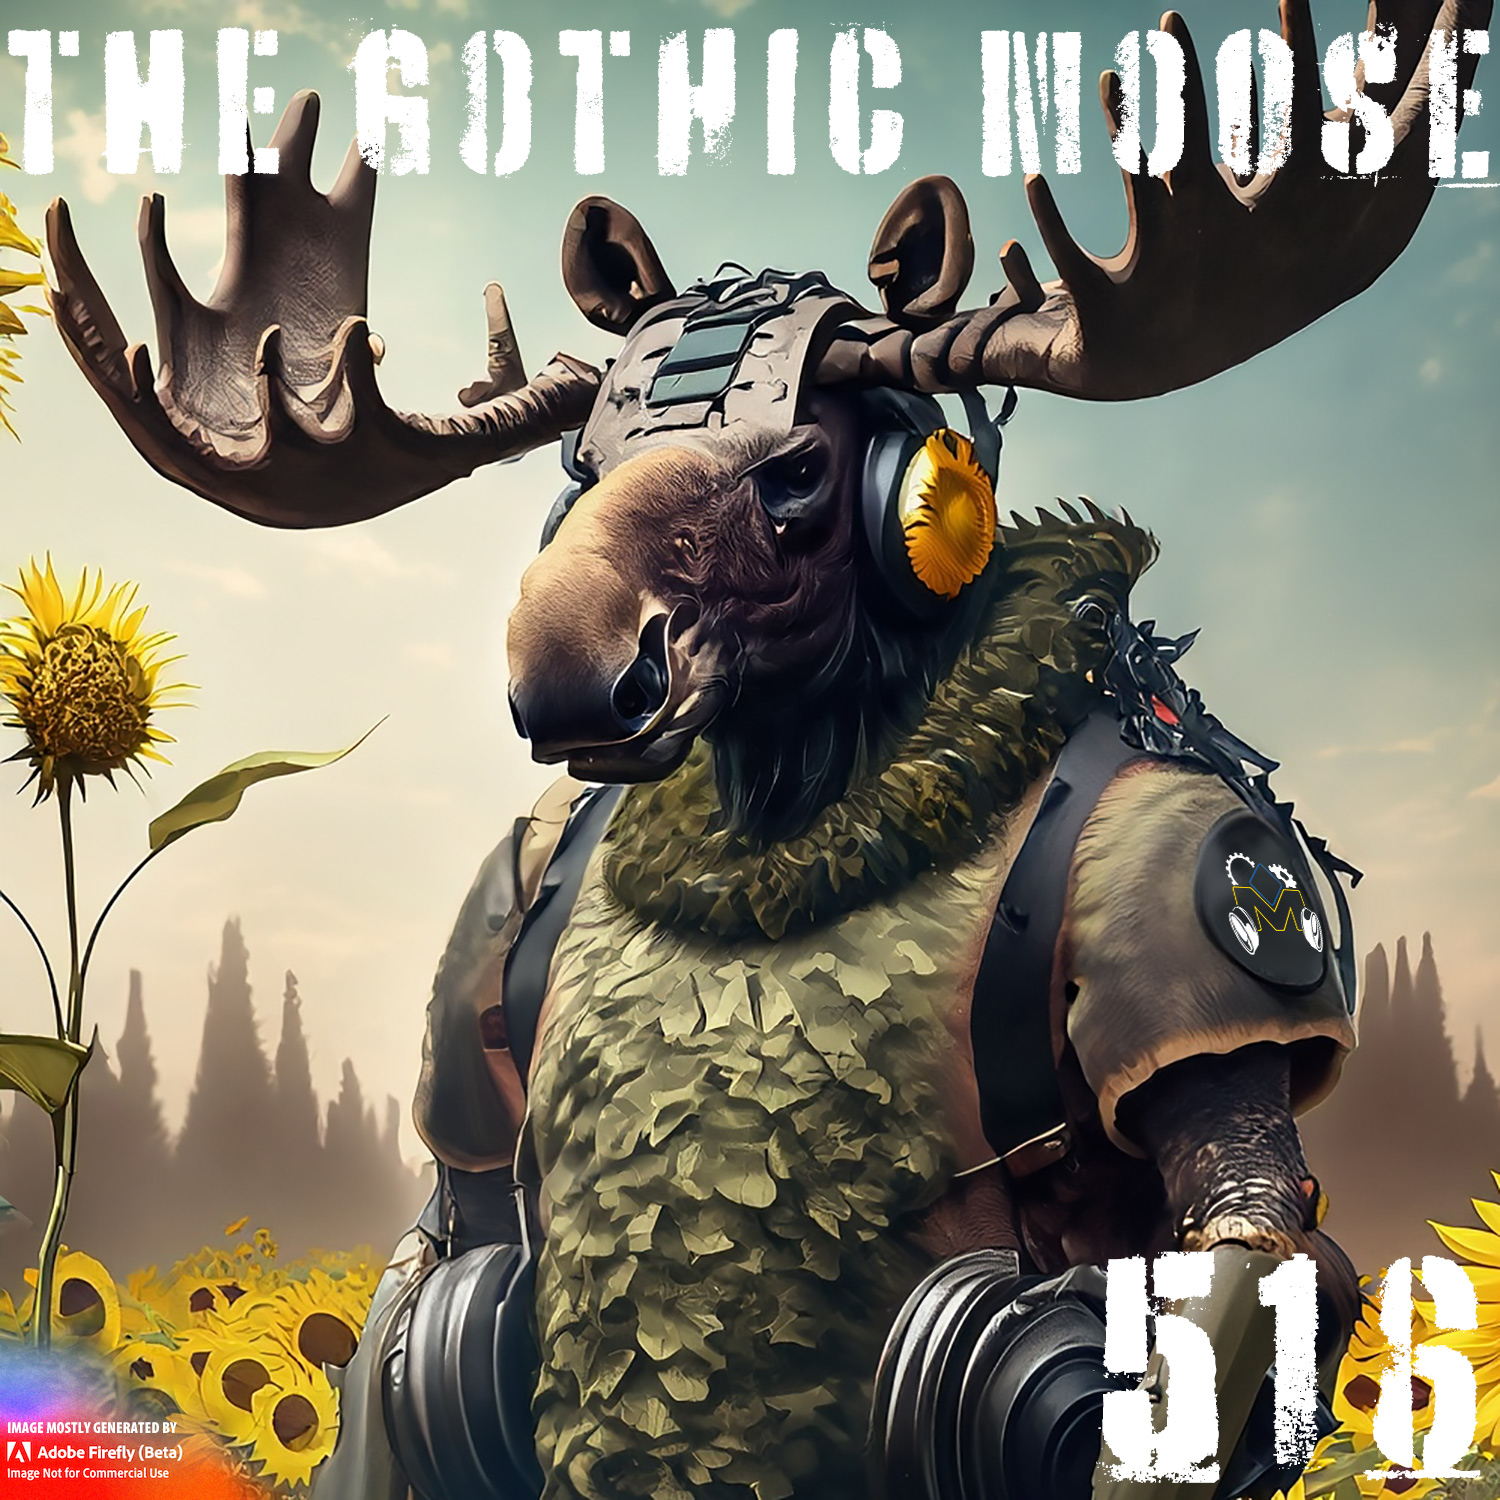 The Gothic Moose – Episode 516 – All Ukrainian bands or bands supporting Ukraine